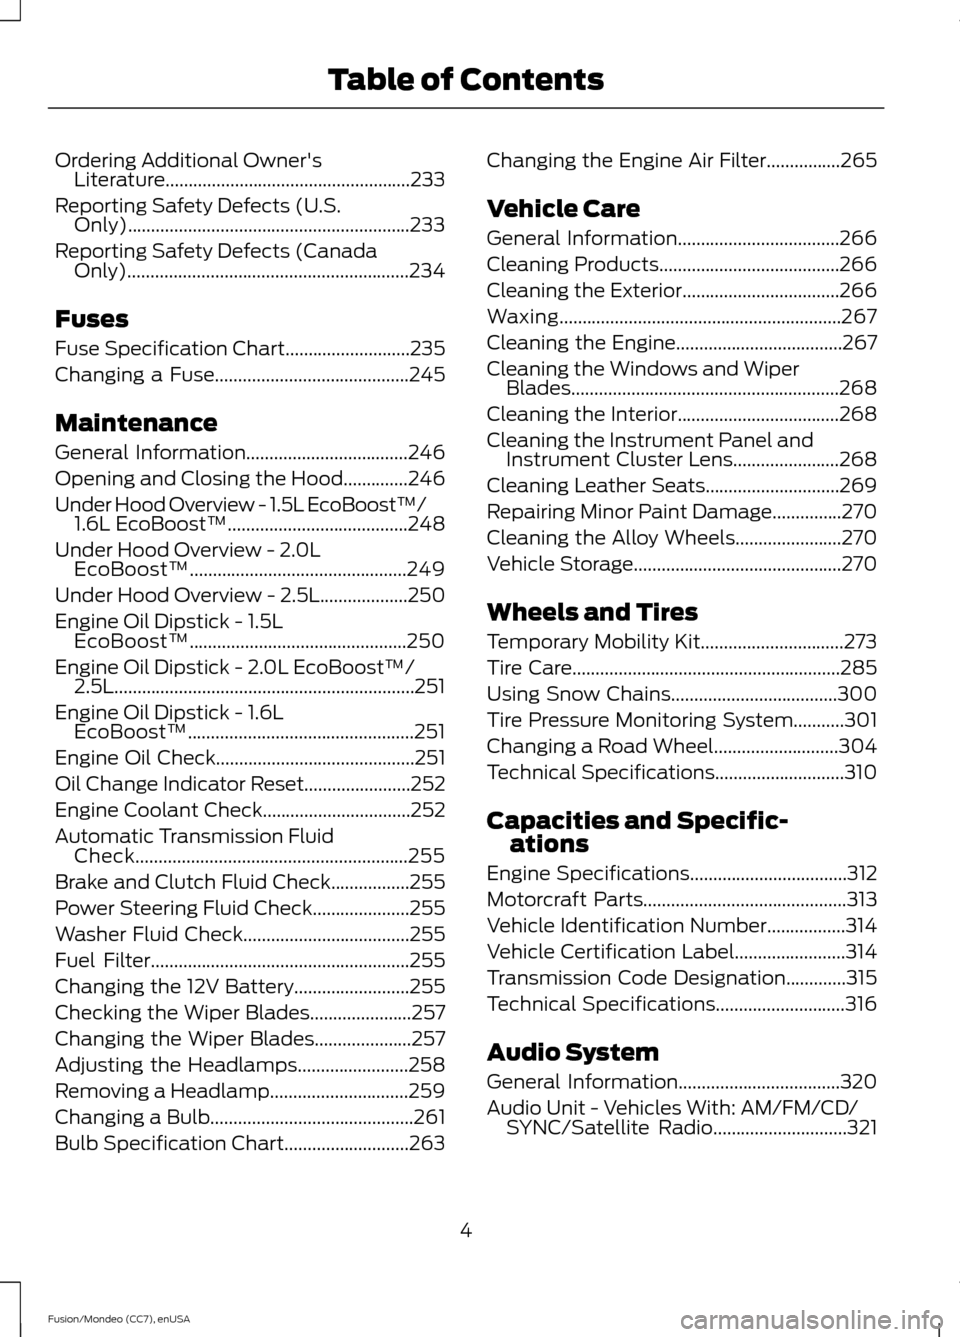 FORD FUSION (AMERICAS) 2015 2.G Owners Manual Ordering Additional Owners
Literature.....................................................233
Reporting Safety Defects (U.S. Only).............................................................233
Repo